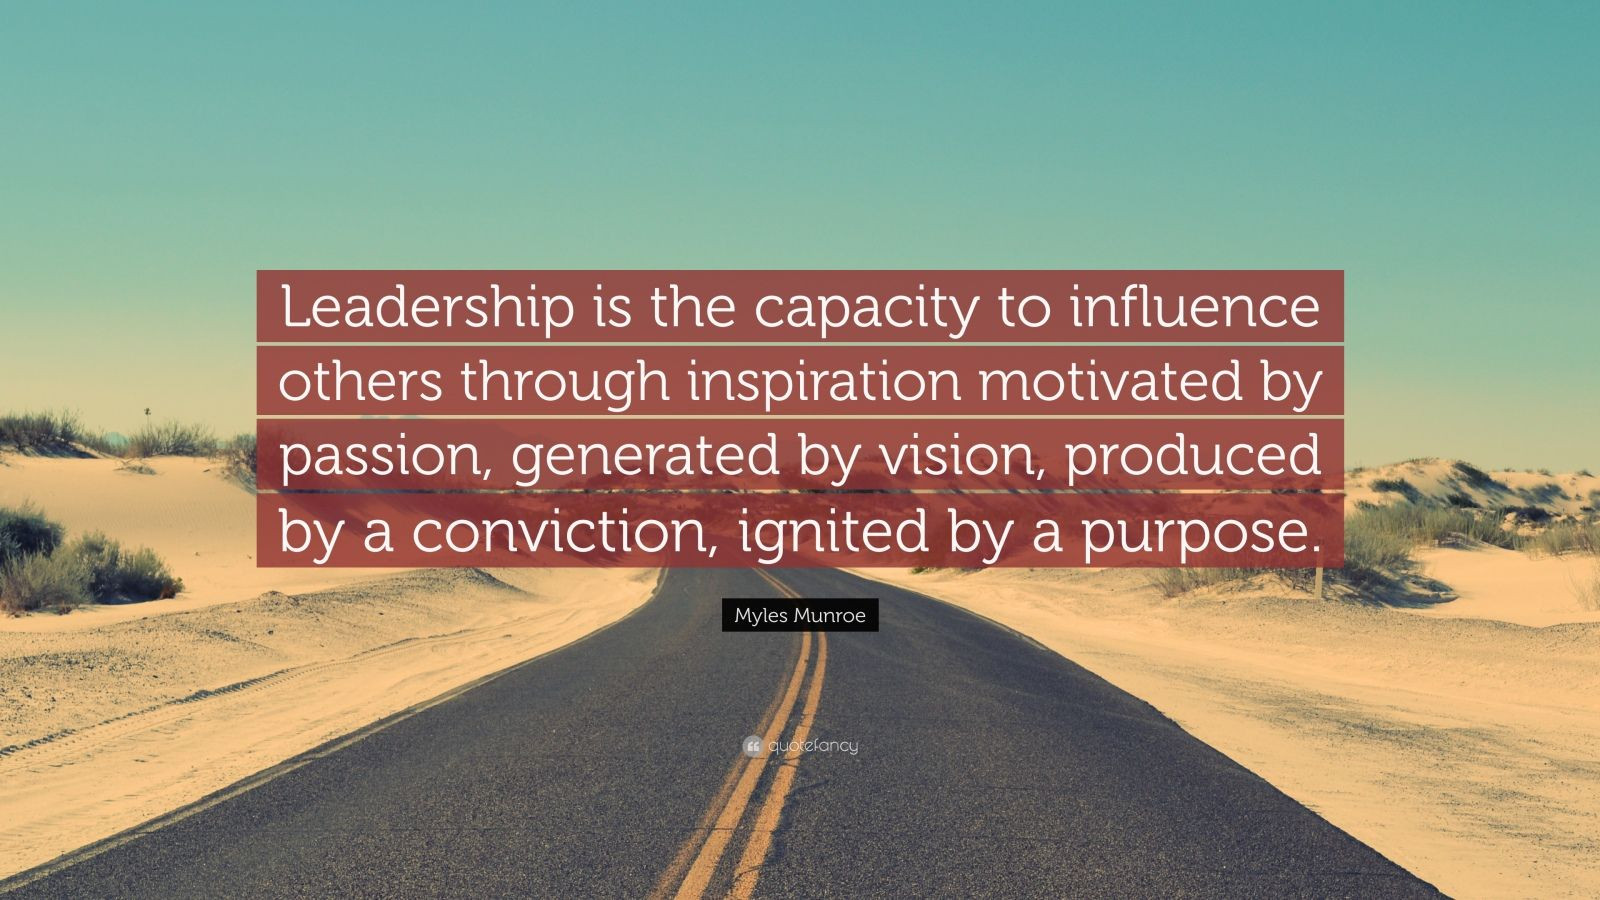 Leadership Is Influence Quote
 Myles Munroe Quote “Leadership is the capacity to